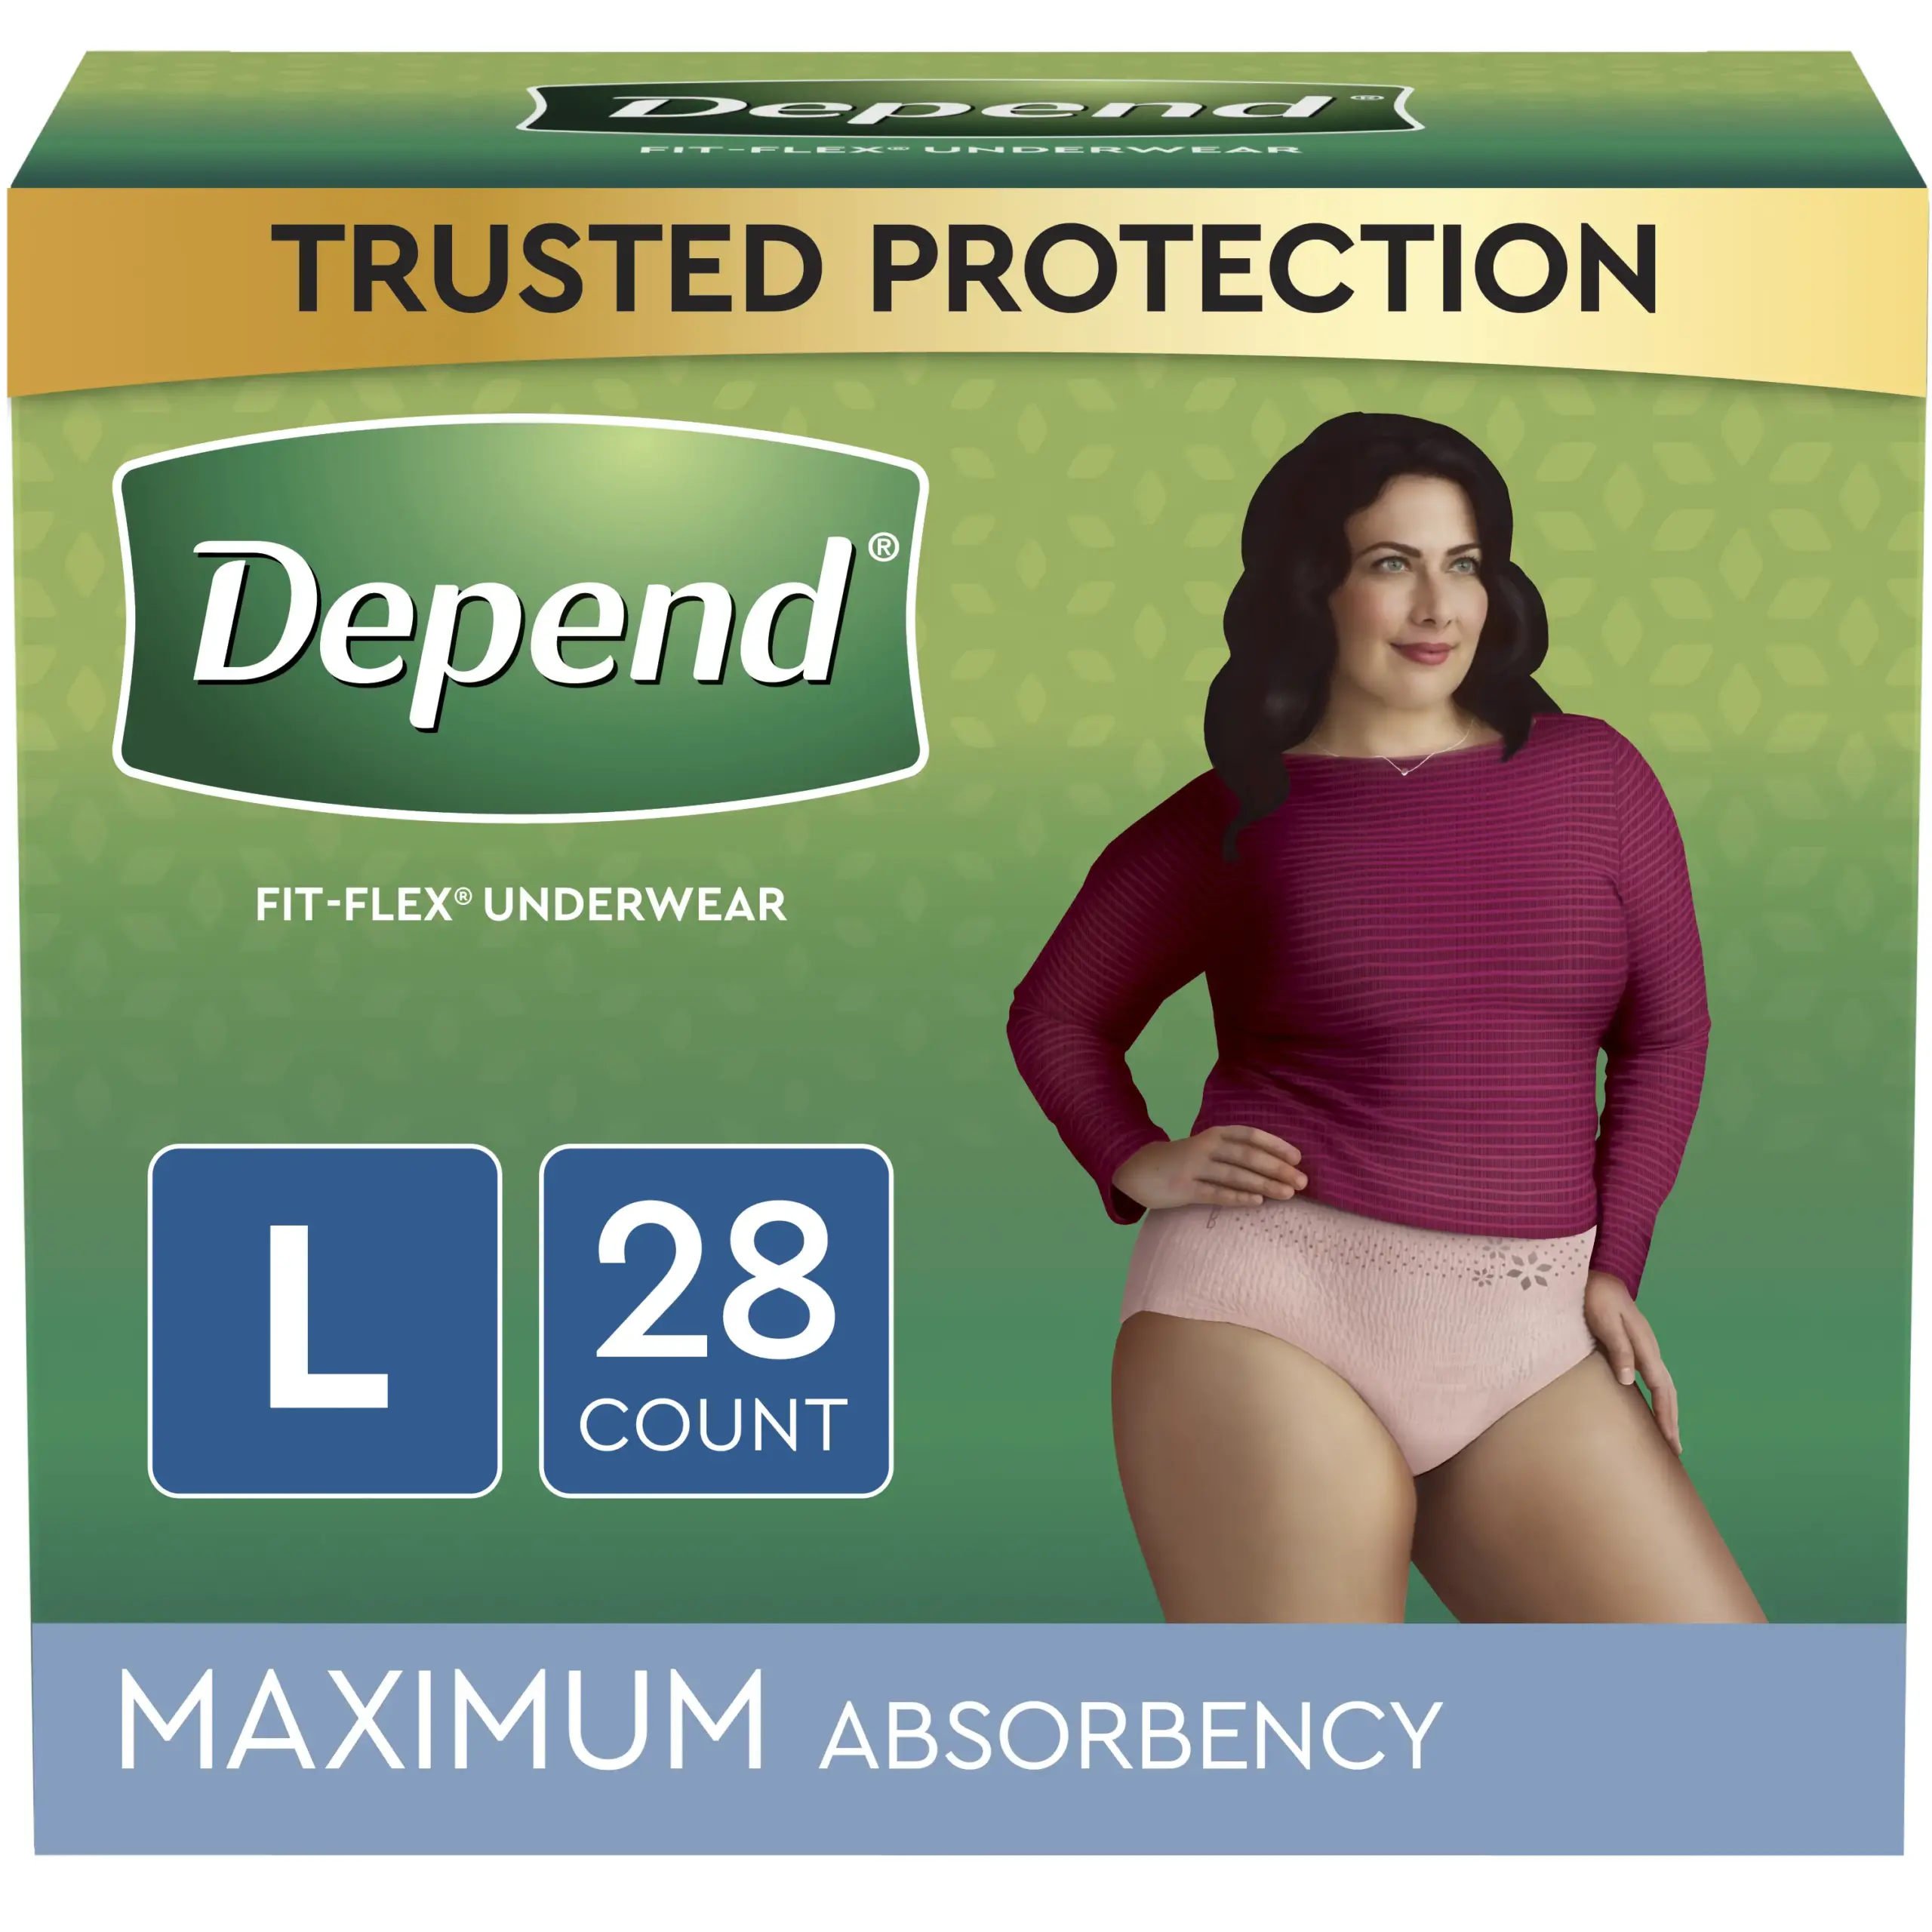 Depend FIT-FLEX Incontinence Underwear for Women, Maximum Absorbency, Large, Blush, 28 Count, Replaces Item 6912537